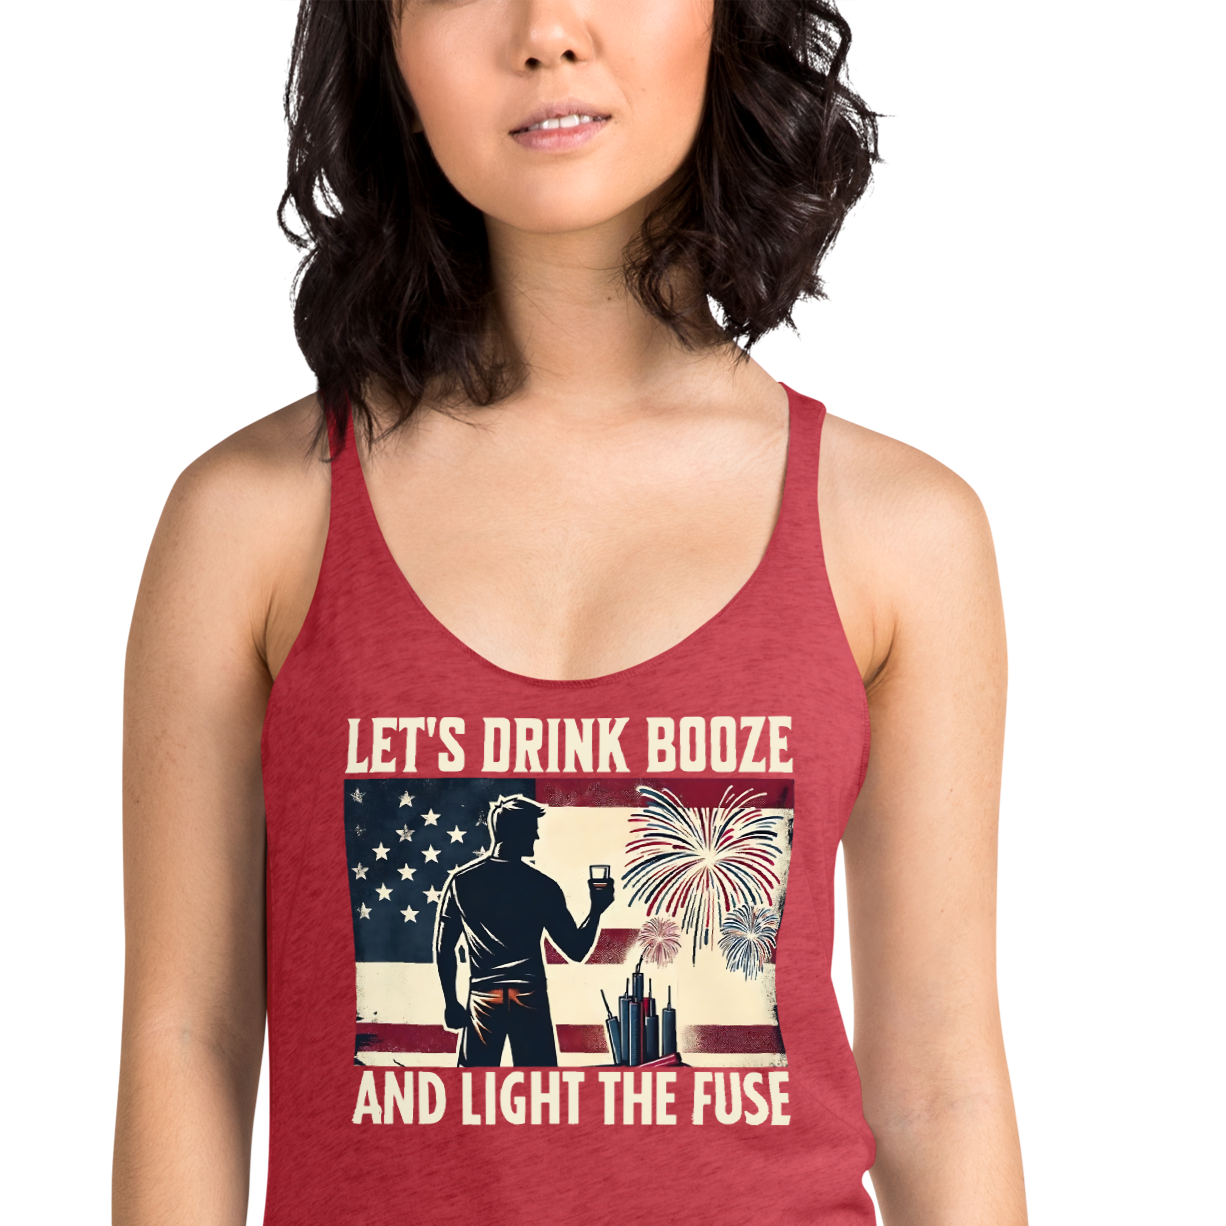 Let's Drink Booze and Light the Fuse Racerback Tank - Patriotic 4th of July Apparel